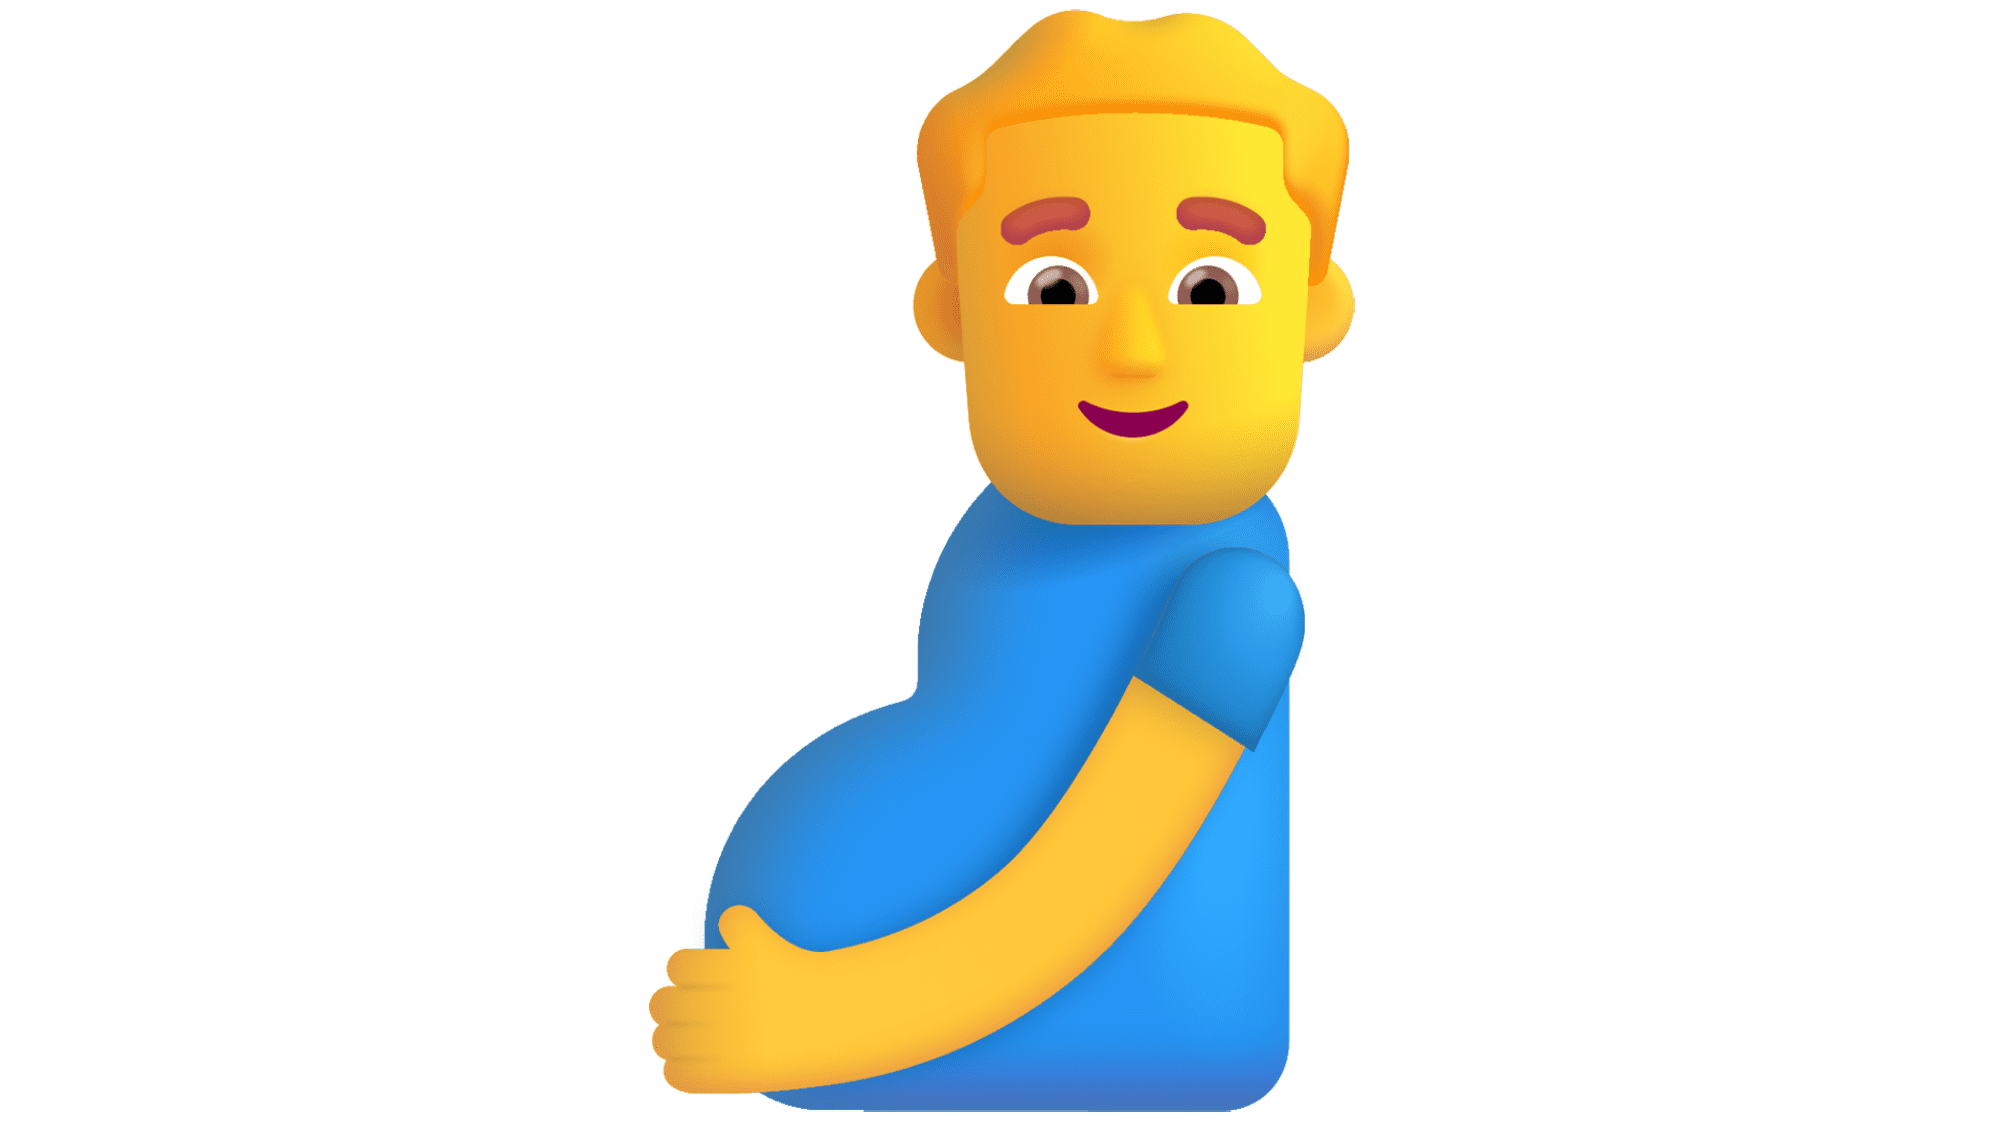 Pregnant Man Emoji - what it means and how to use it.